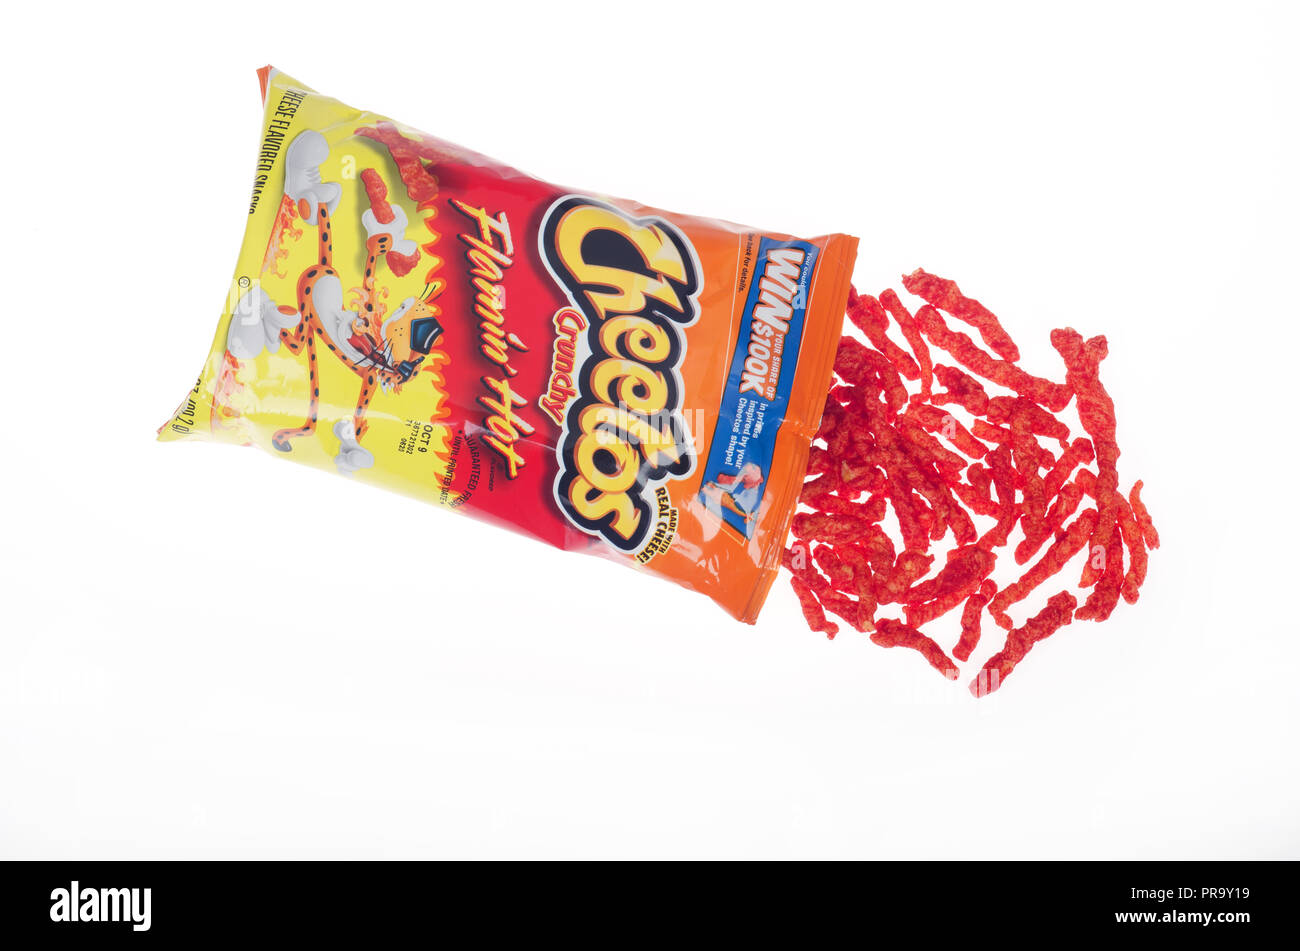 Opened bag of Cheetos Crunchy Flamin’ Hot snacks with some pouring out onto white background Stock Photo